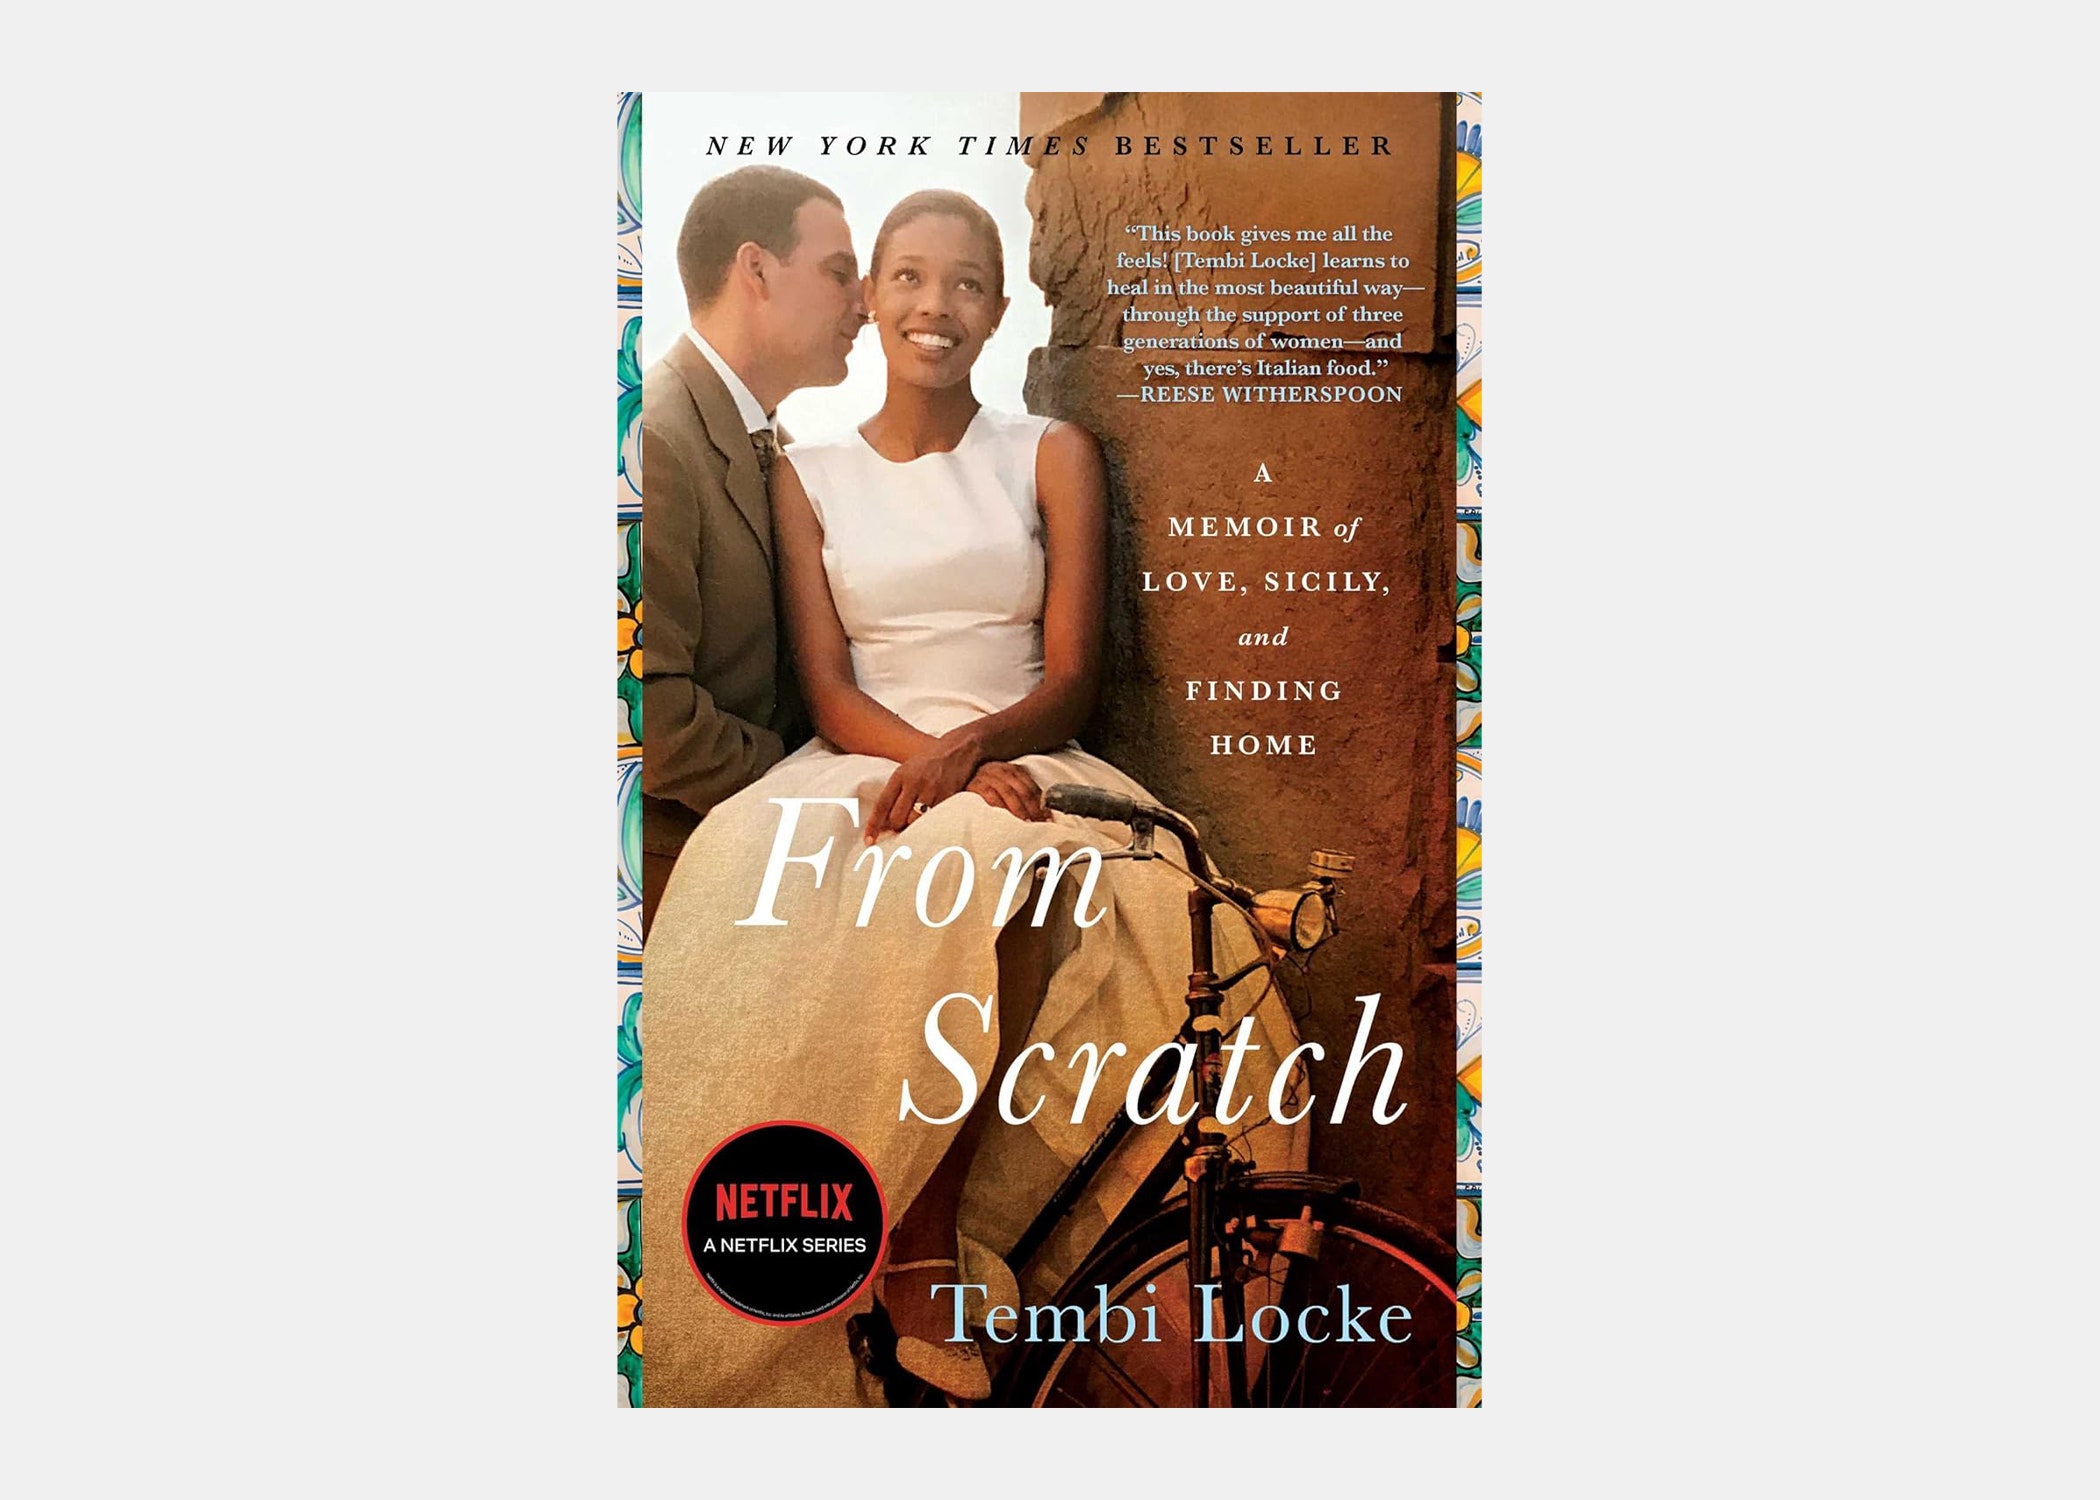 <p><strong>What it’s about:</strong> If <em>Under the Tuscan Sun</em> is an easy-going drive through the Italian heartland, then <em>From Scratch</em> is a journey of highs and lows along the hilly and rugged terrain of Sicily. Actor and writer Tembi Locke’s memoir tells her personal history of falling in love with her Italian husband, building a life together in Los Angeles, grieving him after his death due to cancer, and rebuilding her life with their daughter in Sicily. The book is heartfelt and Locke’s language is generous and graceful. If you’d rather binge the story on your screen, there’s a <a href="https://www.netflix.com/title/81104486">2022 Netflix adaptation</a> too. Either way, both will leave you weeping into your tub of gelato.</p> <p><strong>The mood it’s giving:</strong> Making eye contact with the love of your life, being reminded that life is bittersweet—so beautiful and so short</p> <p><strong>The book’s first line:</strong> “In Sicily, every story begins with a marriage or a death. In my case, it’s both.”</p> $10, Amazon. <a href="https://www.amazon.com/Scratch-Memoir-Love-Sicily-Finding/dp/150118766X/ref=sr_1_1?crid=2RN03MP70GIJO&keywords=From+Scratch%3A+A+Memoir+of+Love%2C+Sicily%2C+and+Finding+Home+by+Tembi+Locke&qid=1698282361&s=books&sprefix=from+scratch+a+memoir+of+love%2C+sicily%2C+and+finding+home+by+tembi+locke+%2Cstripbooks%2C134&sr=1-1">Get it now!</a><p>Sign up to receive the latest news, expert tips, and inspiration on all things travel</p><a href="https://www.cntraveler.com/newsletter/the-daily?sourceCode=msnsend">Inspire Me</a>